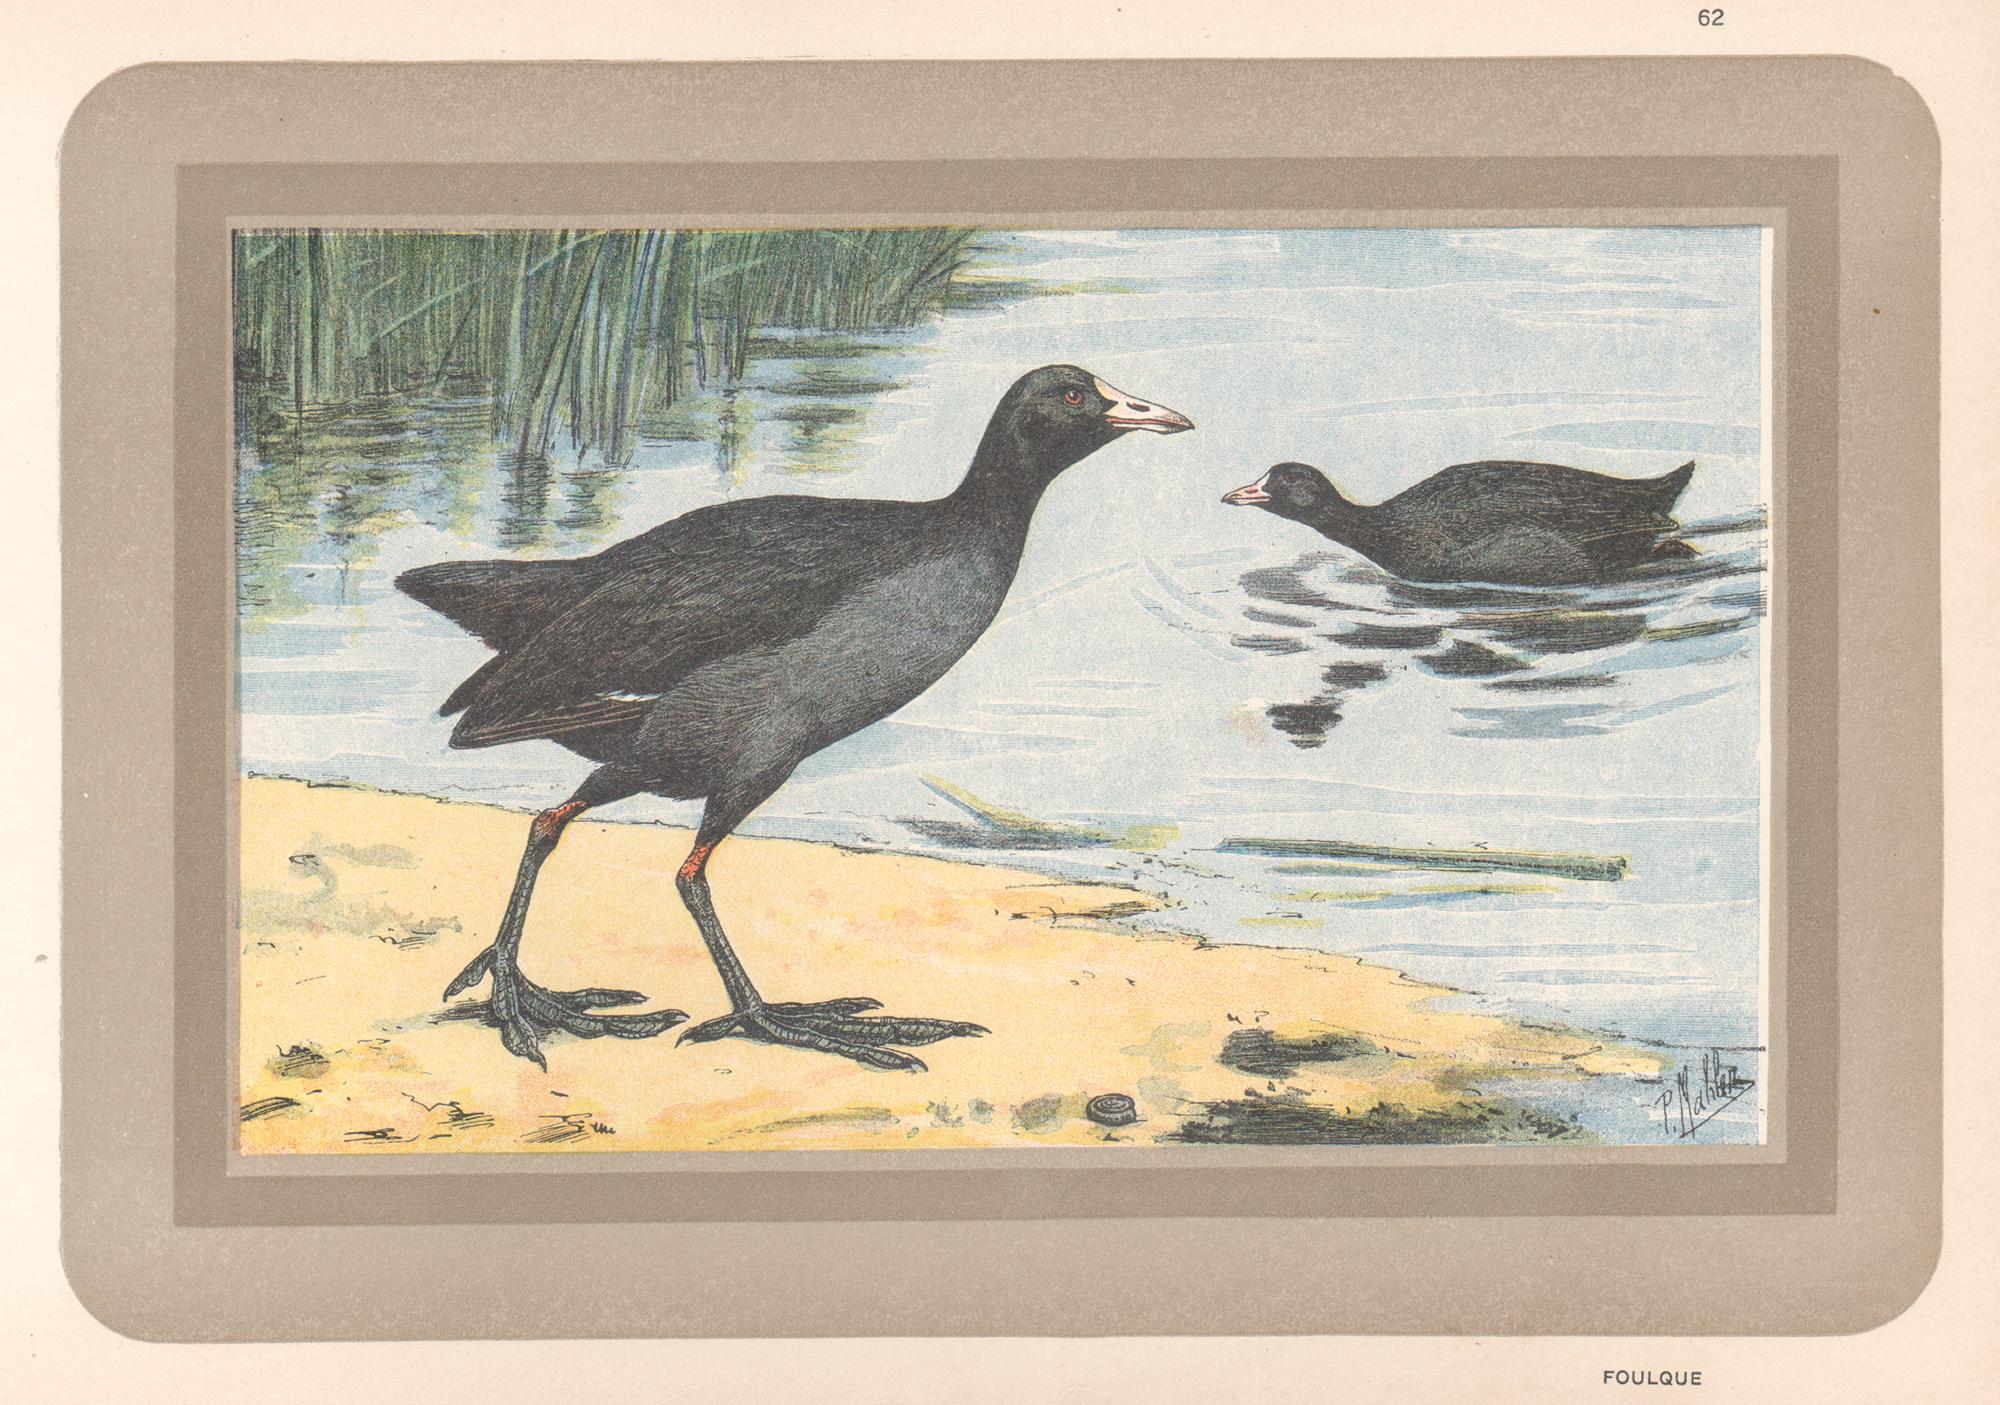 Unknown Animal Print - Common Coot, French antique natural history water bird art print